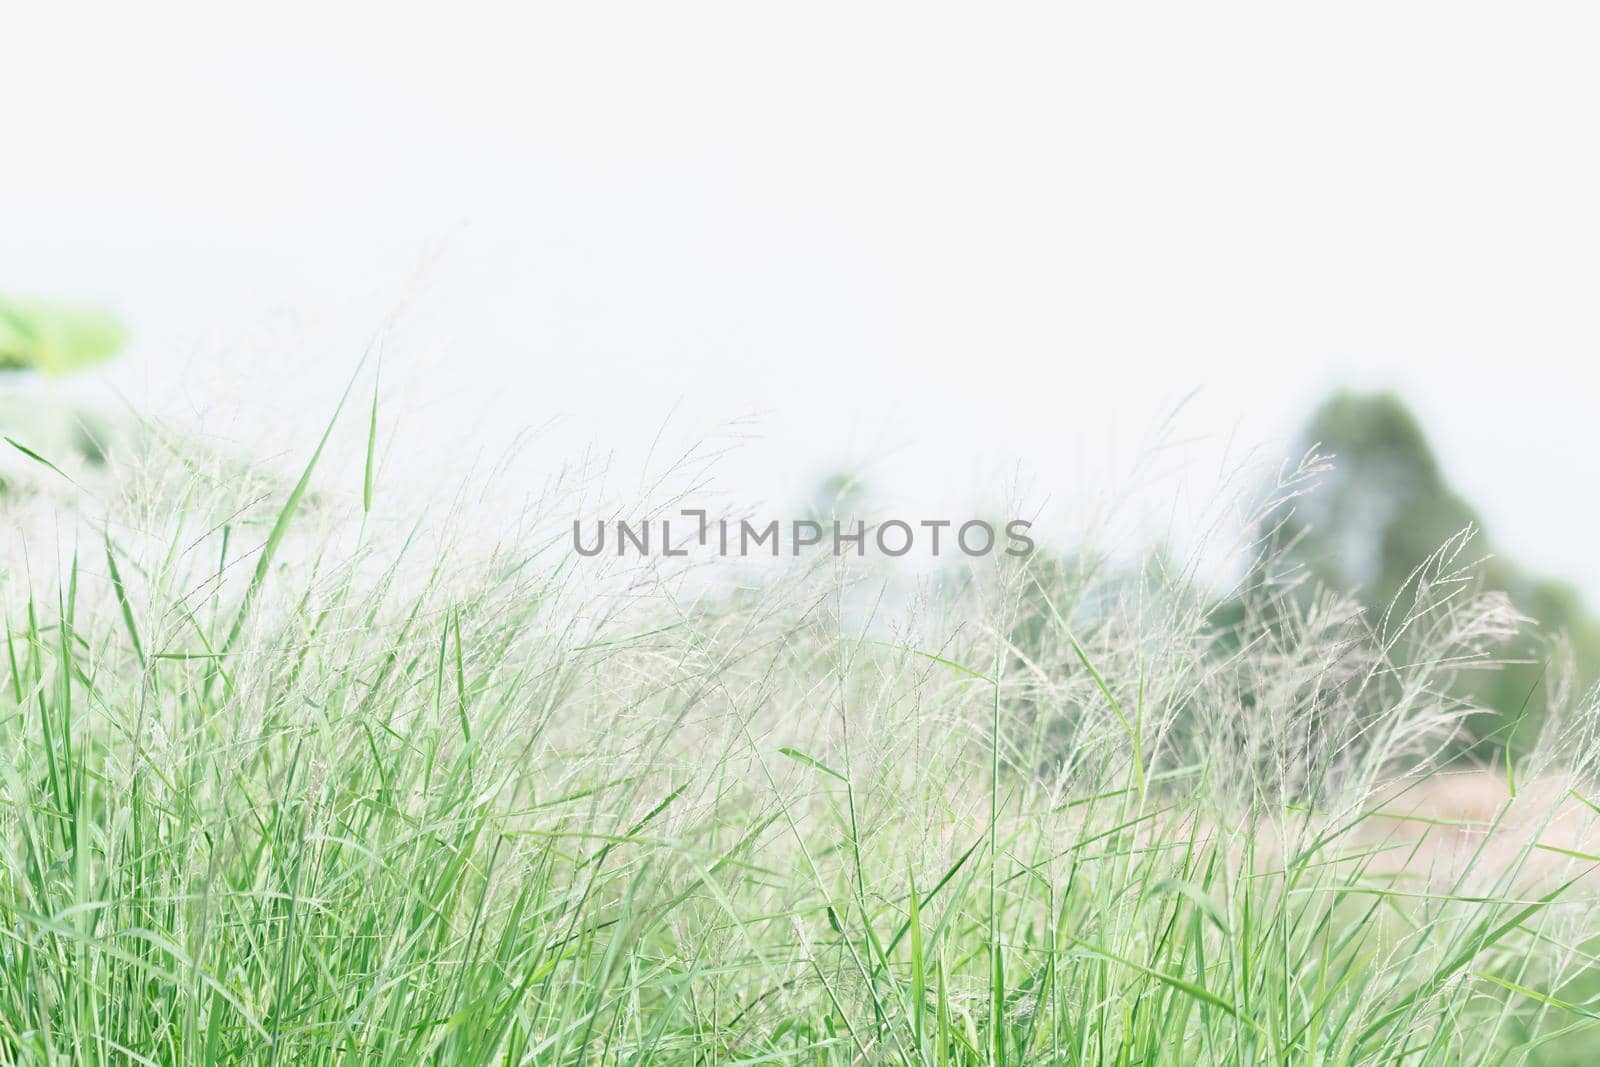 meadow flowers in soft warm light. Vintage autumn landscape blurry natural background.